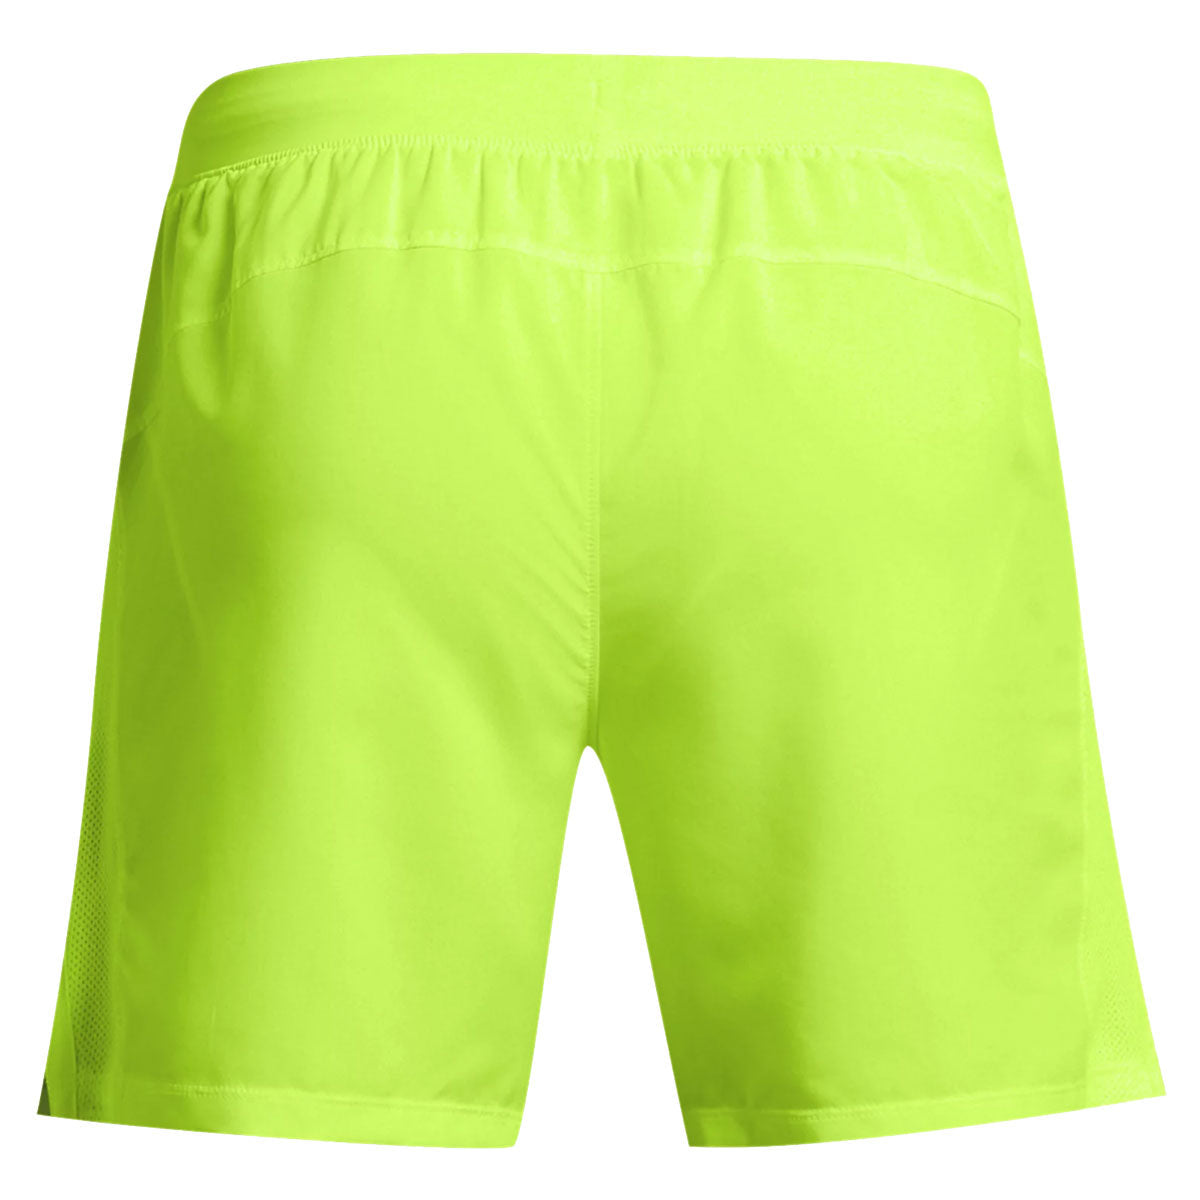 Under Armour Launch 5 inch Running Shorts - Mens - High Vis Yellow/Reflective